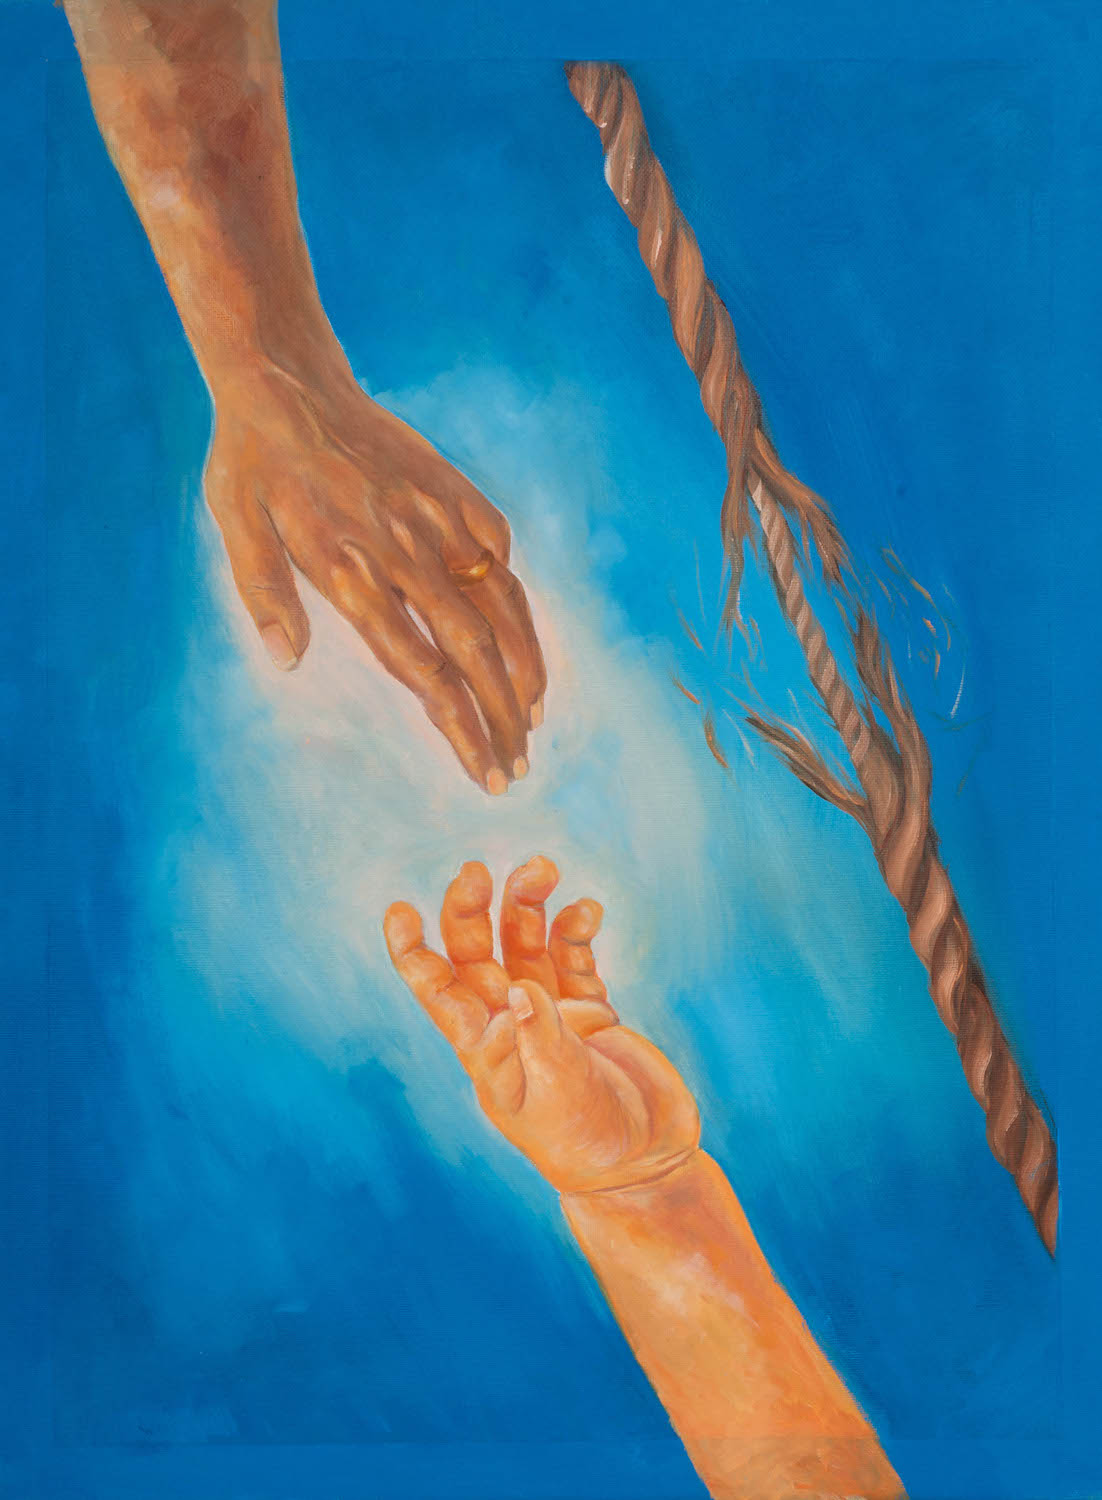 adult hand and child hand reaching for each other next to a rope fraying in the middle